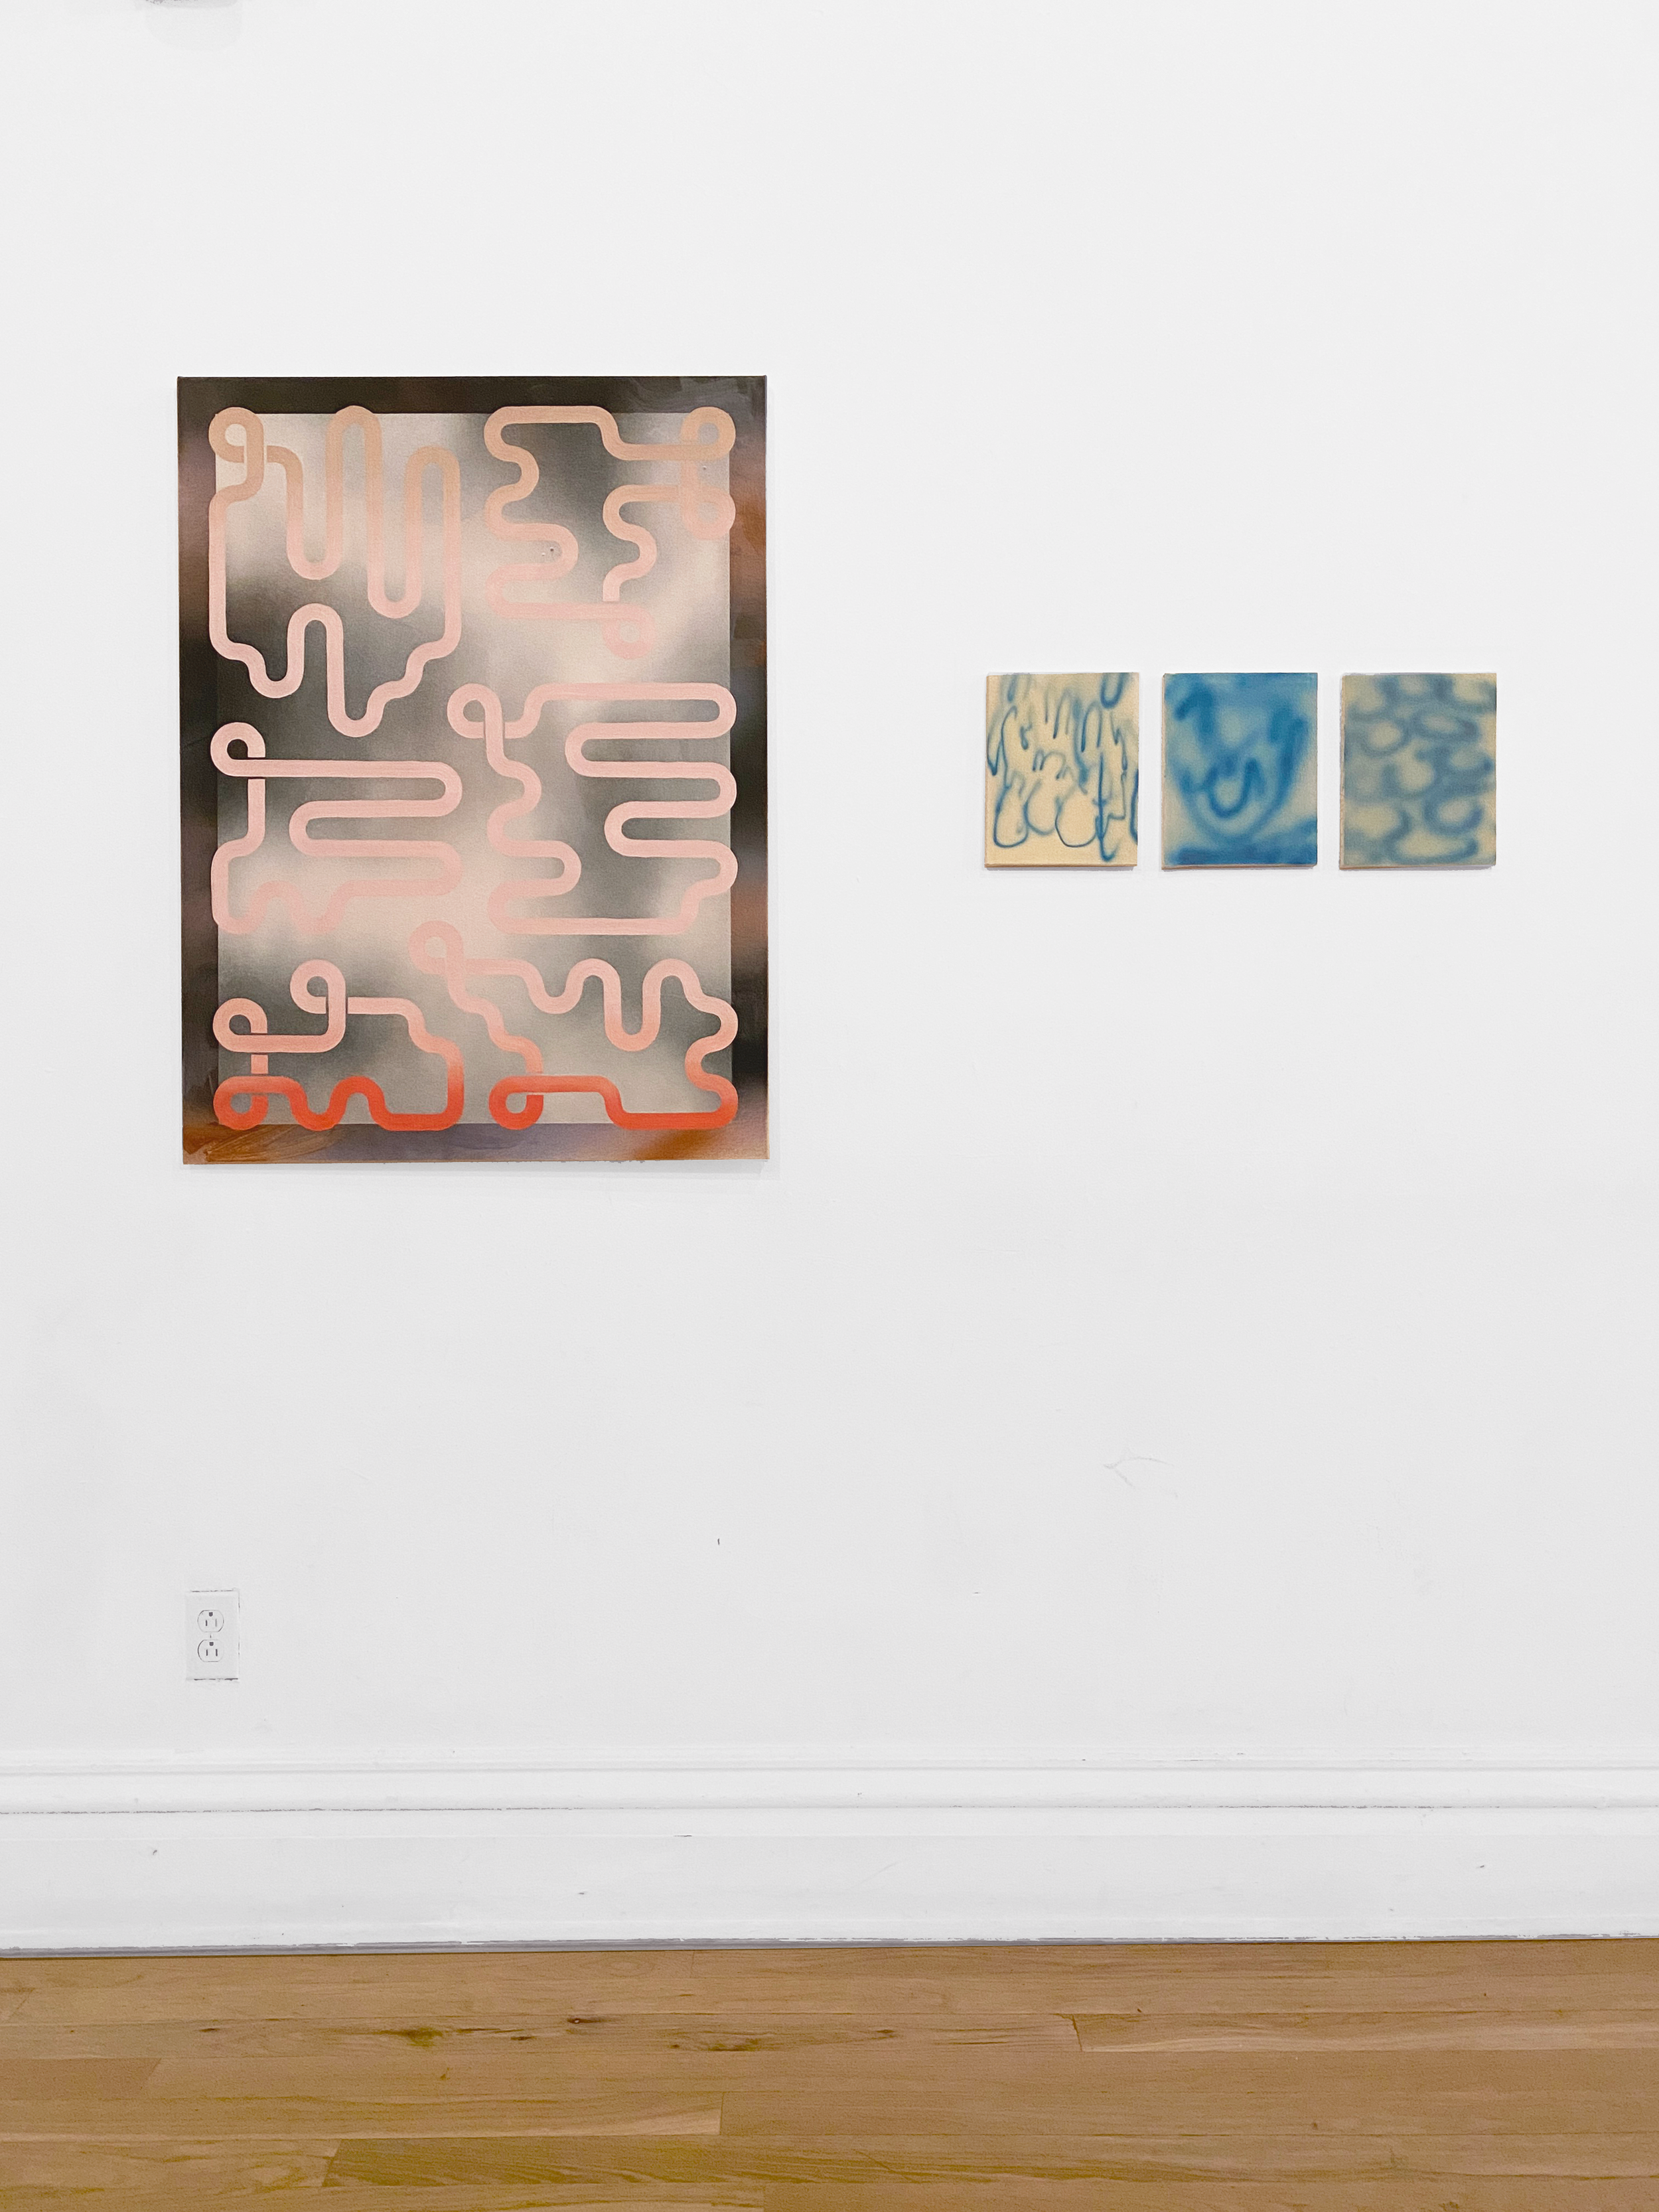  Installation View of Near Heat with John Burt Sanders at the Union Hall, Pittsburgh 